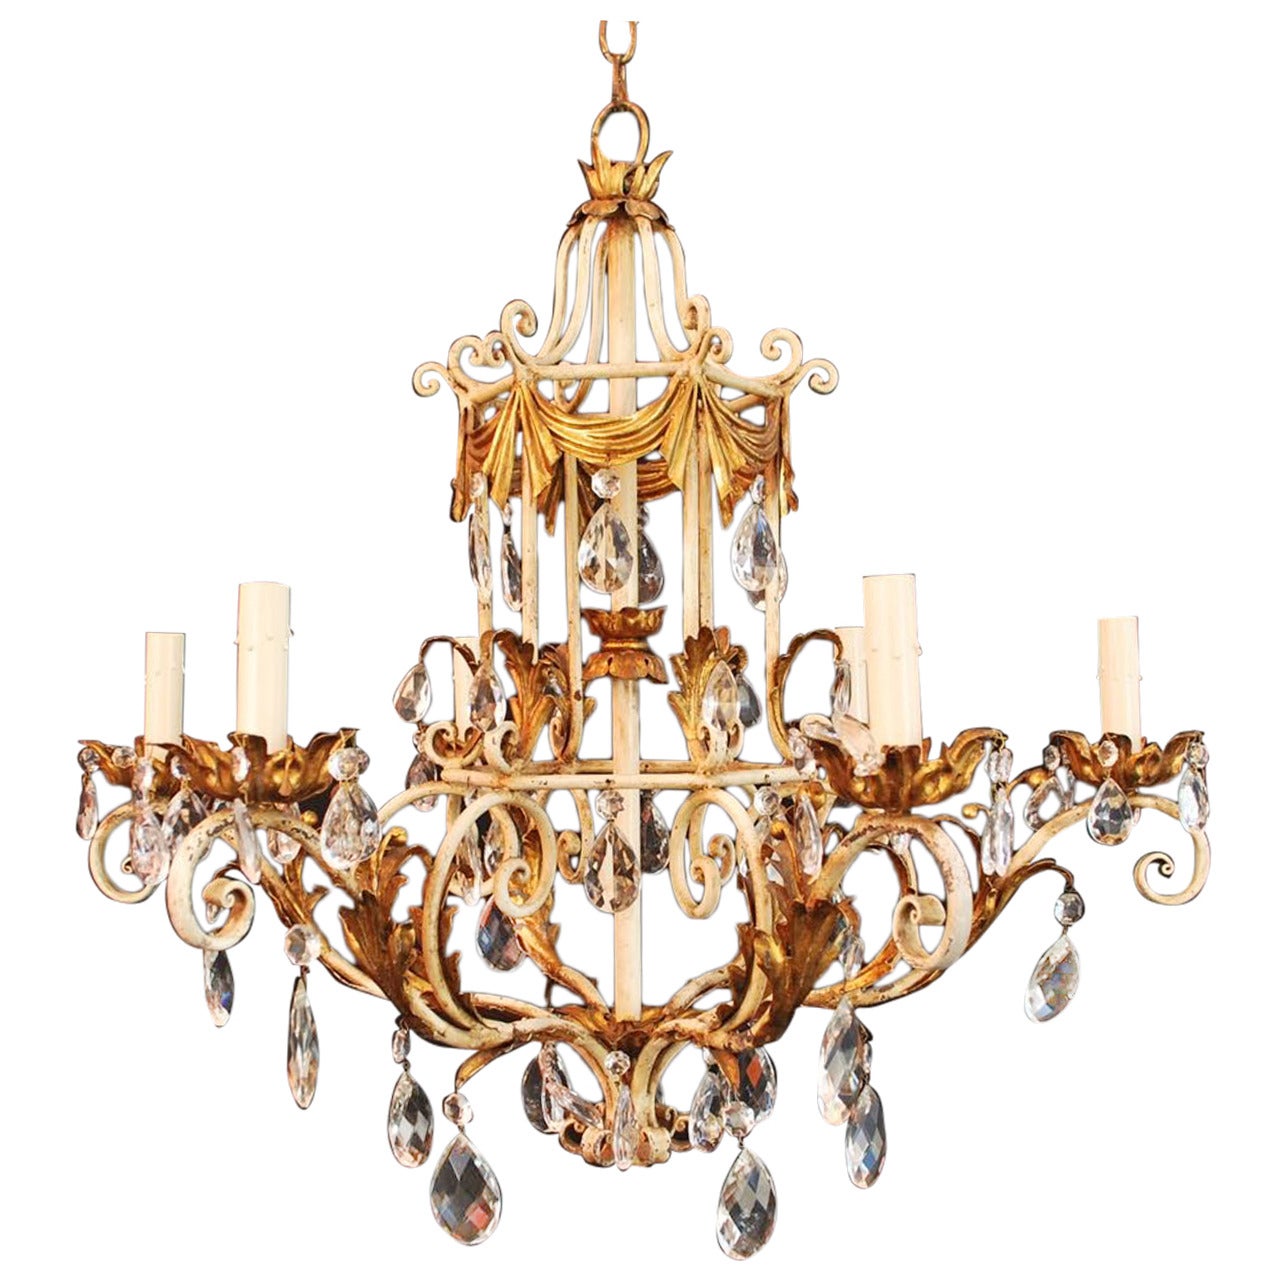 1950 Italian Wrought Iron and Crystal Chandelier